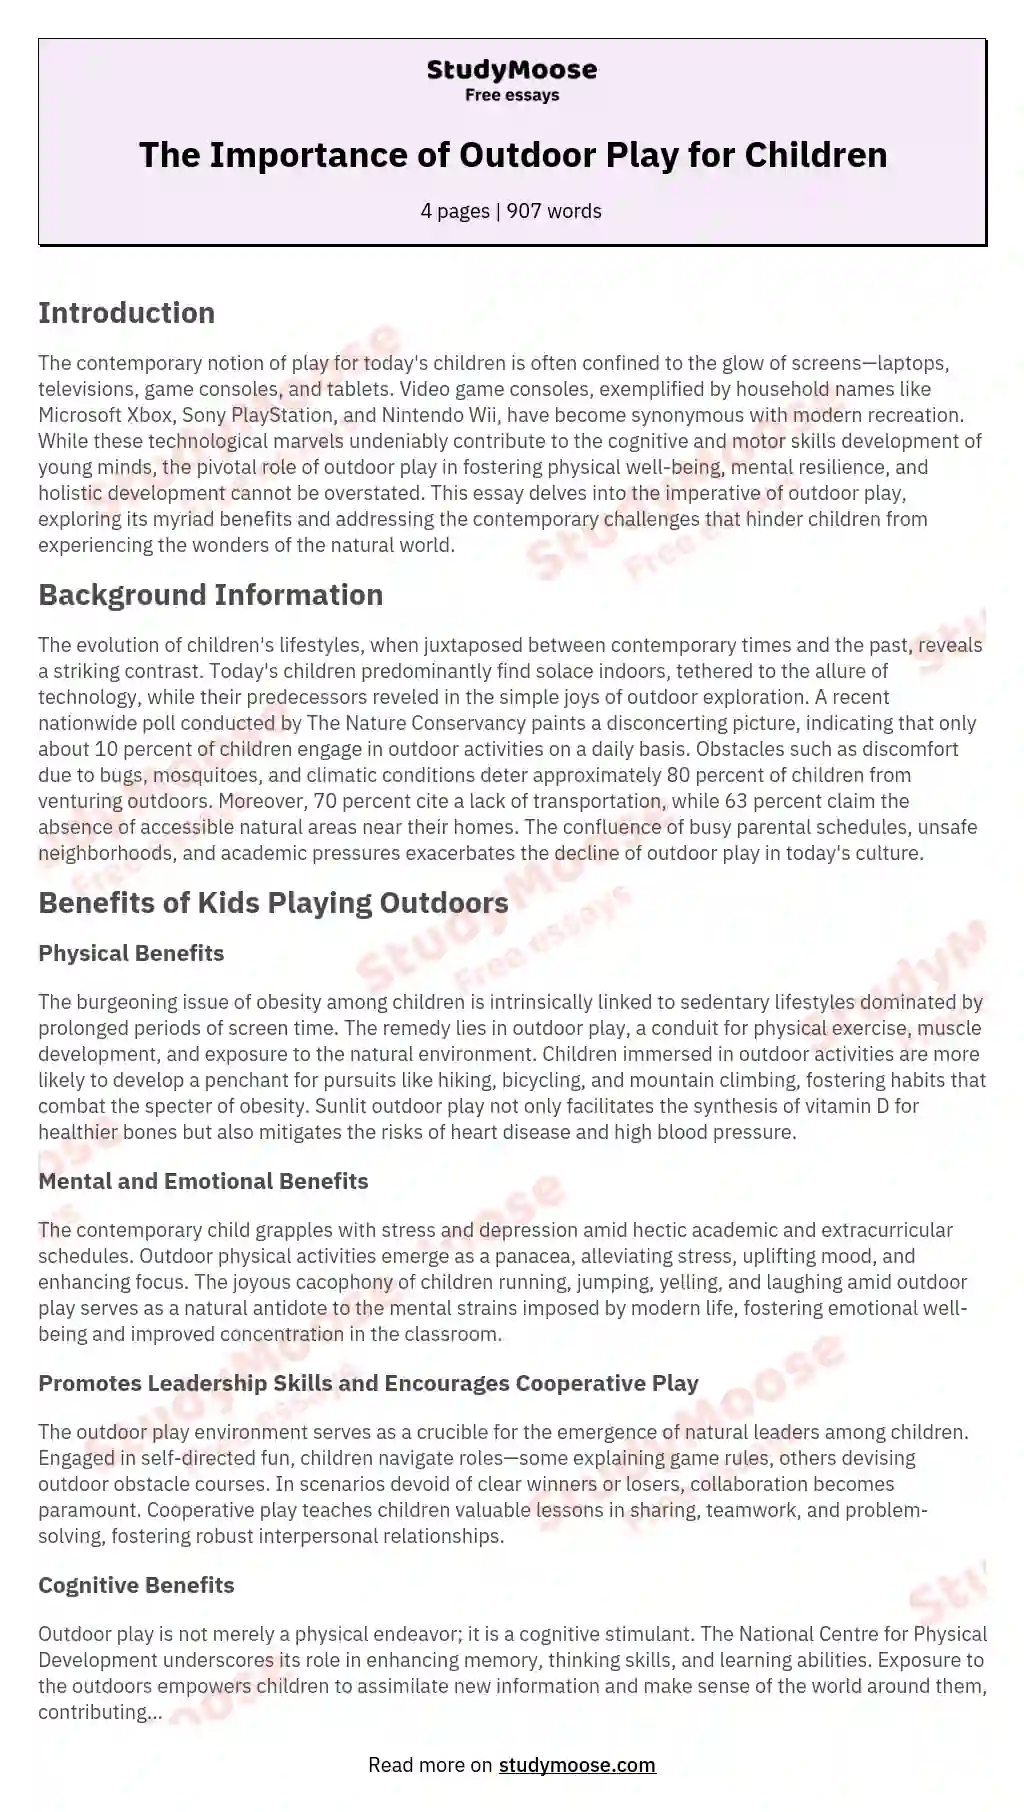 The Importance of Outdoor Play for Children essay